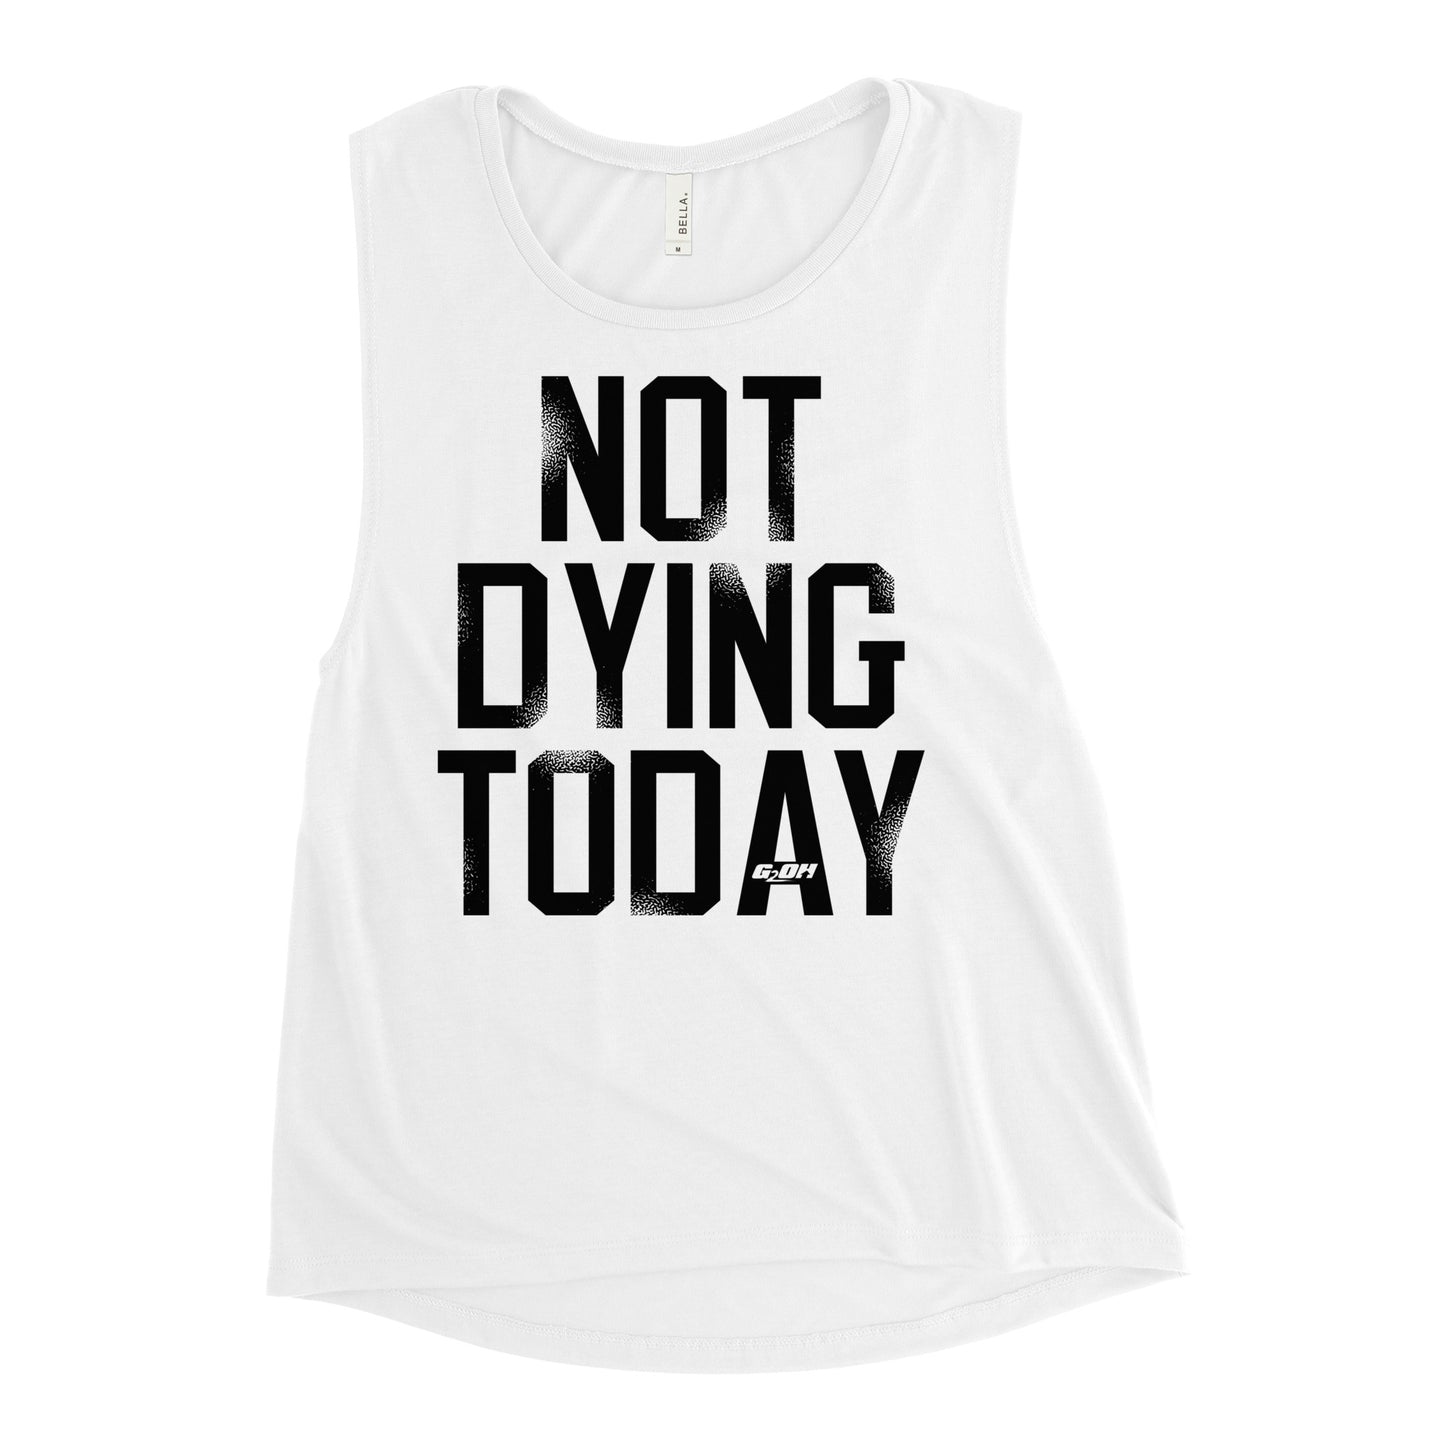 Not Dying Today Women's Muscle Tank